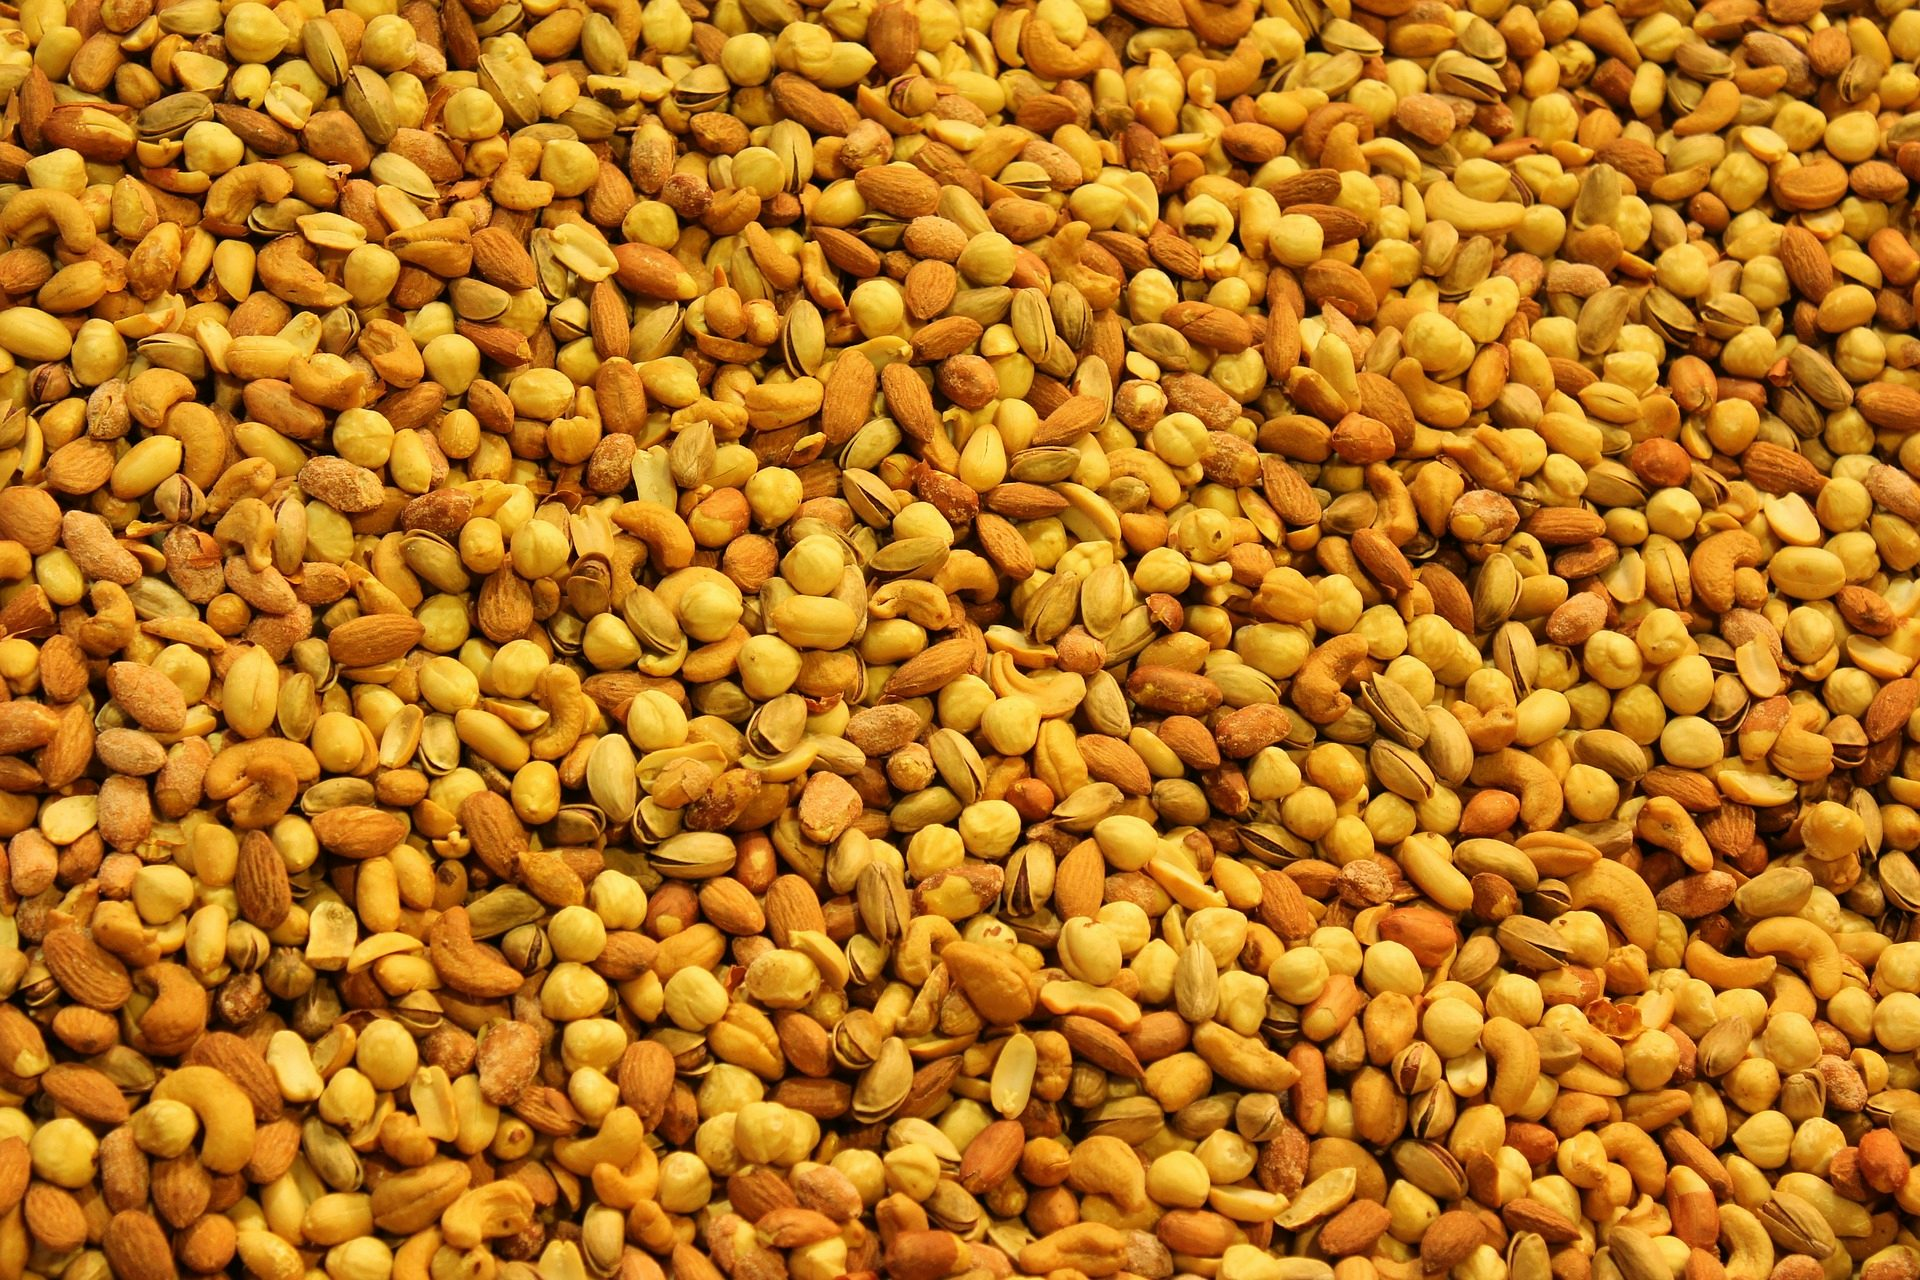 Find Equipment For Processing Nuts